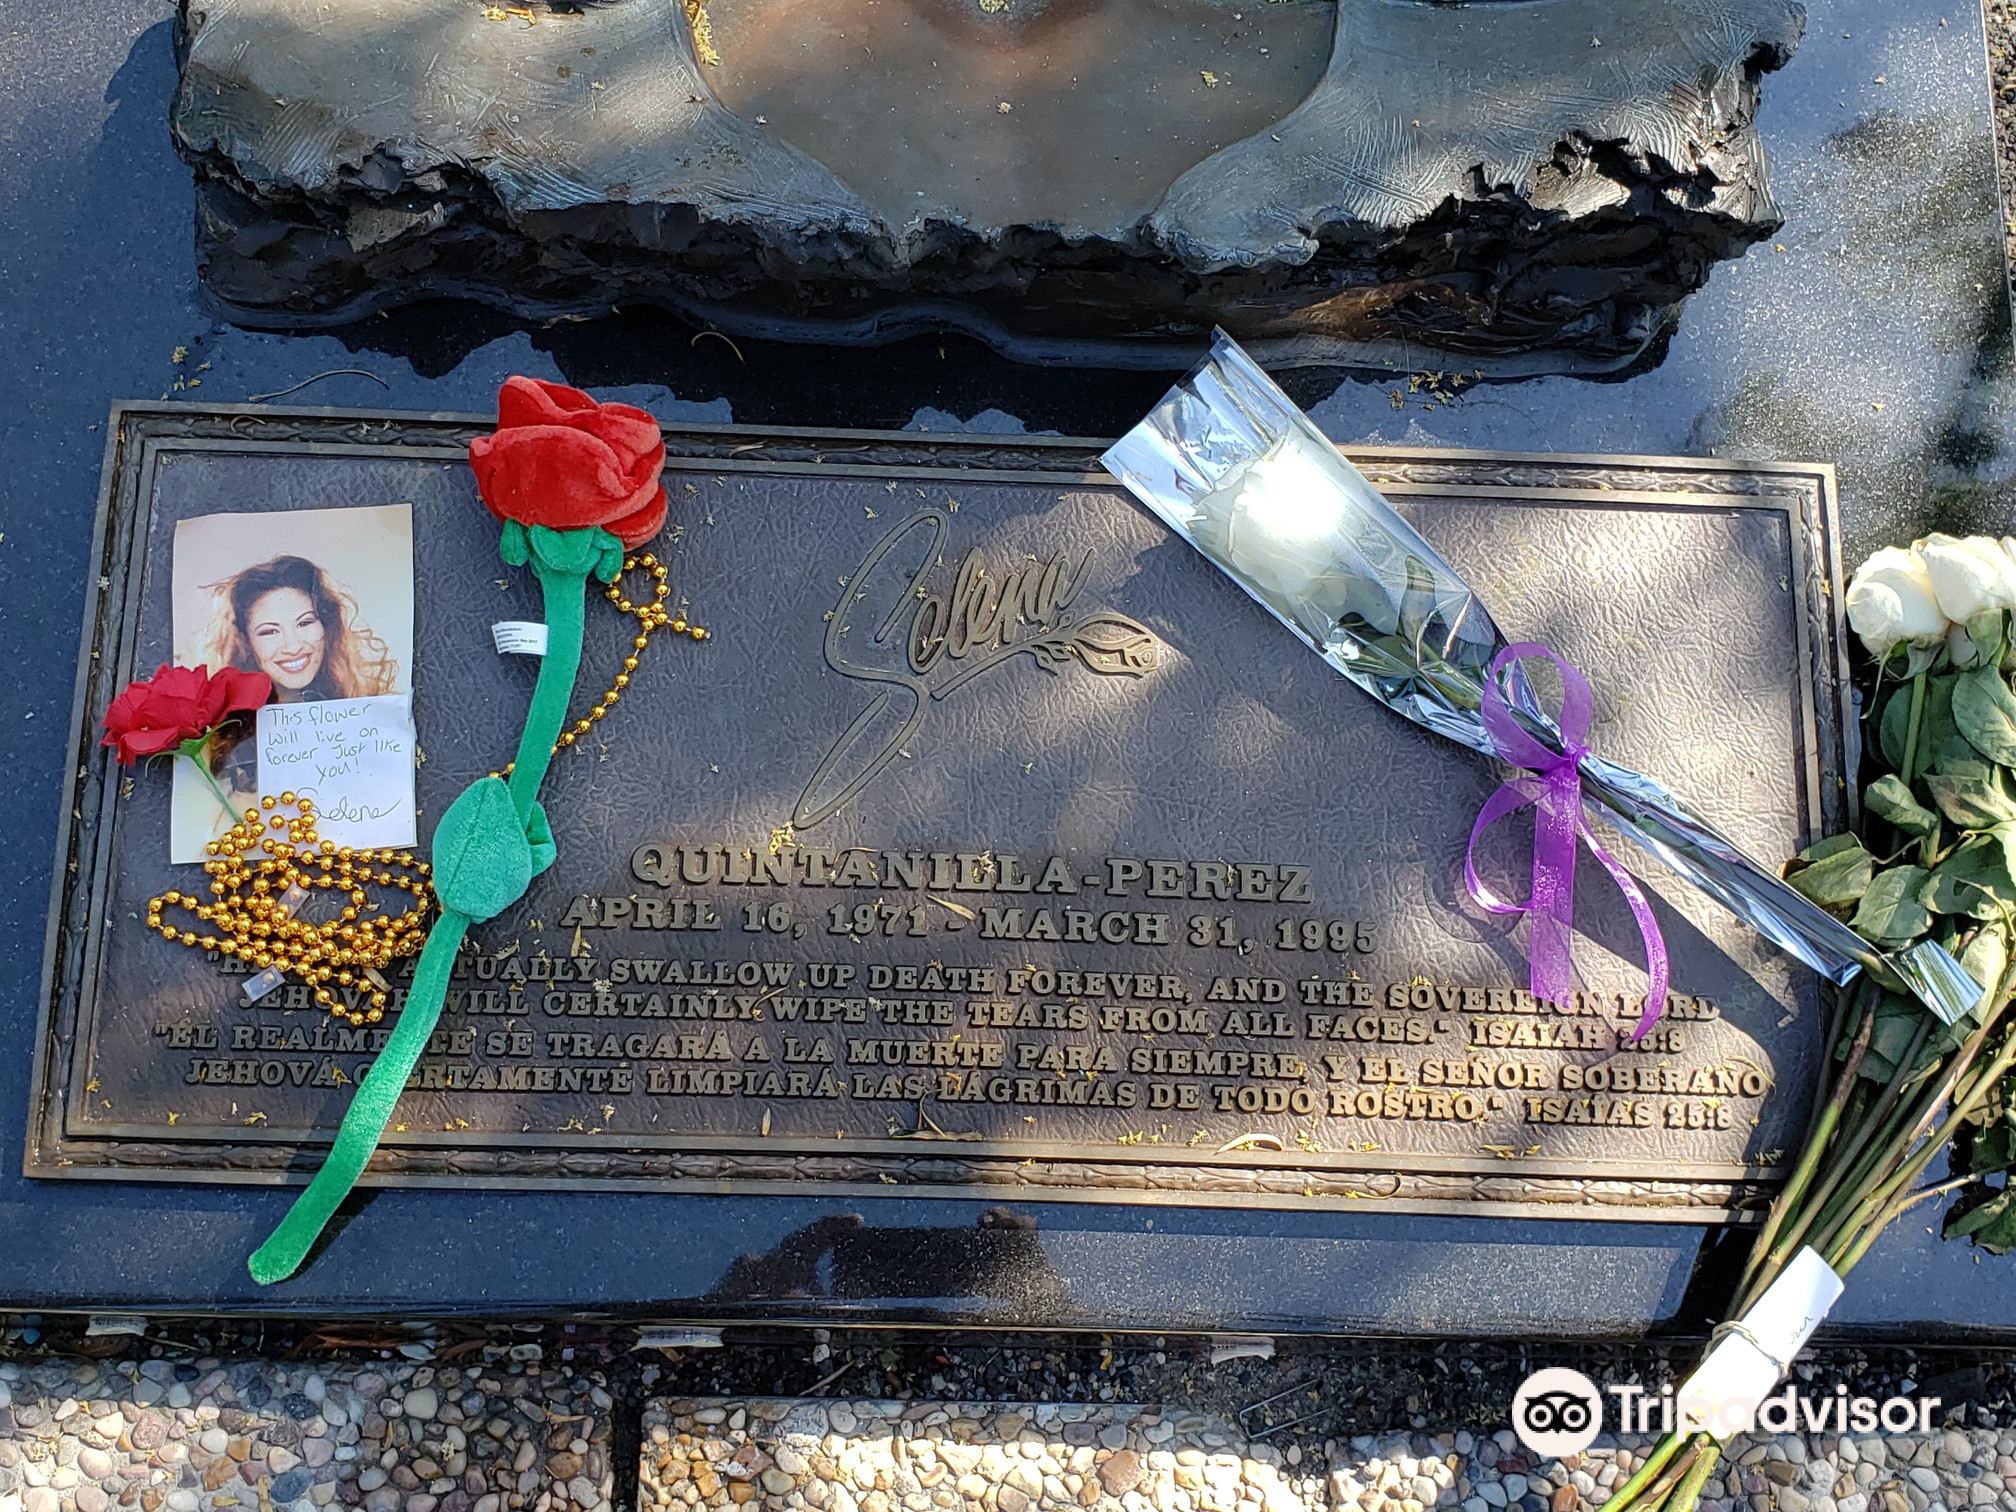 Latest travel itineraries for The Grave of Selena QuintanillaPerez at